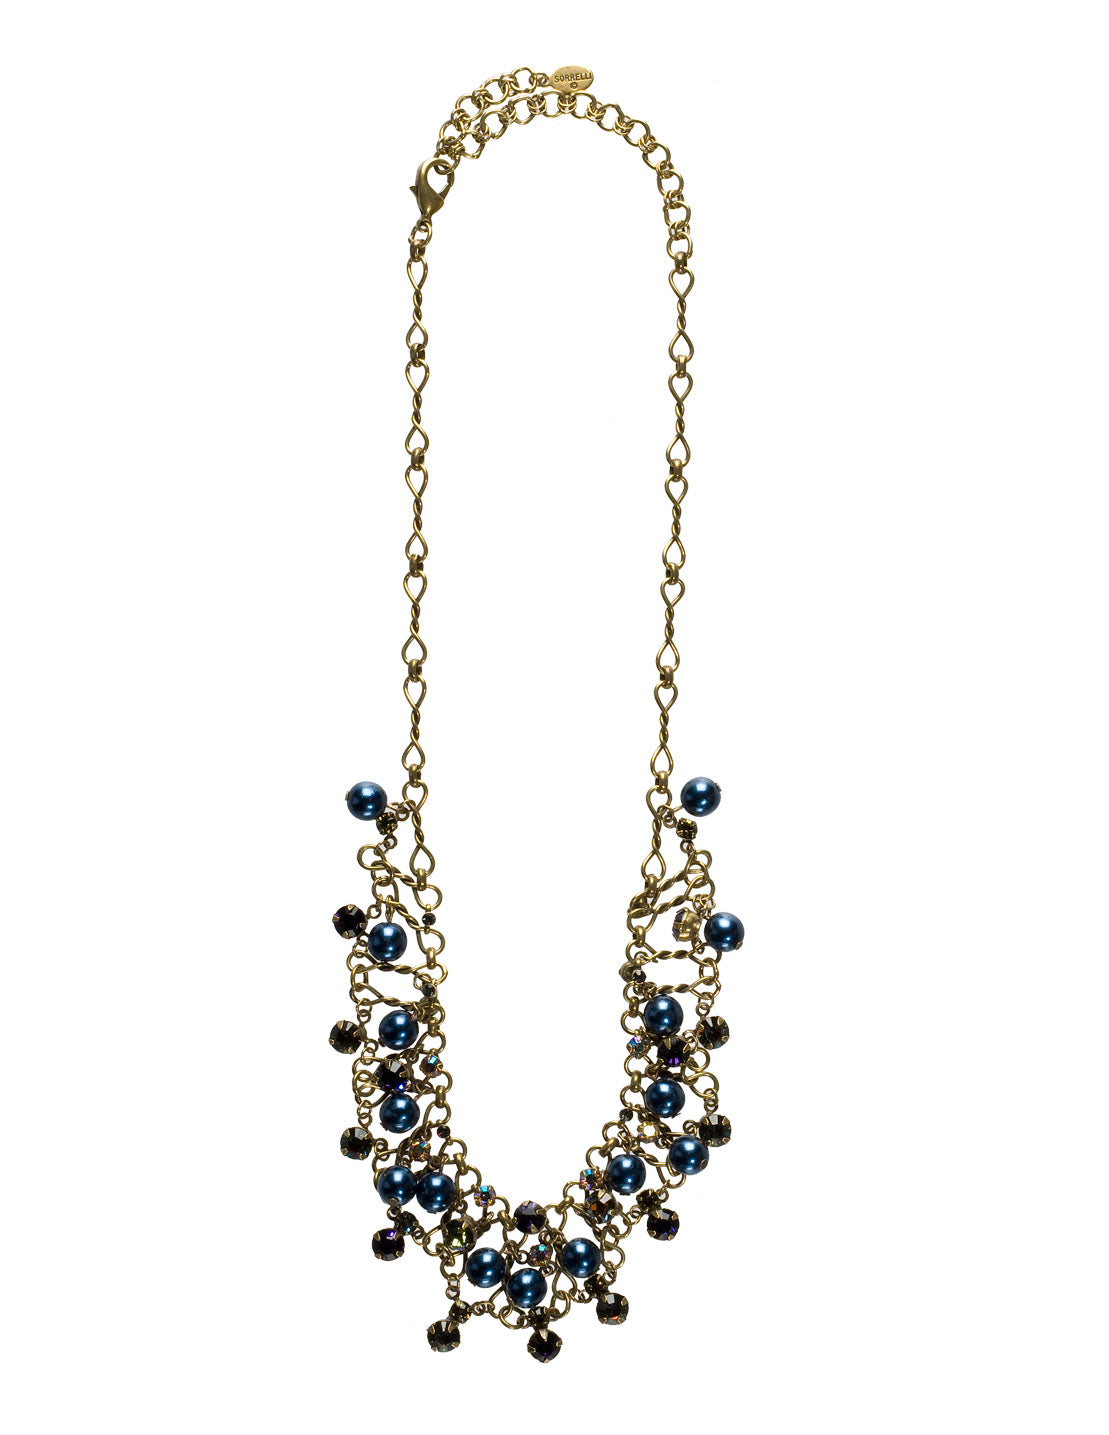 Clustered Crystal and Bead Tennis Necklace - NCF5AGAUS